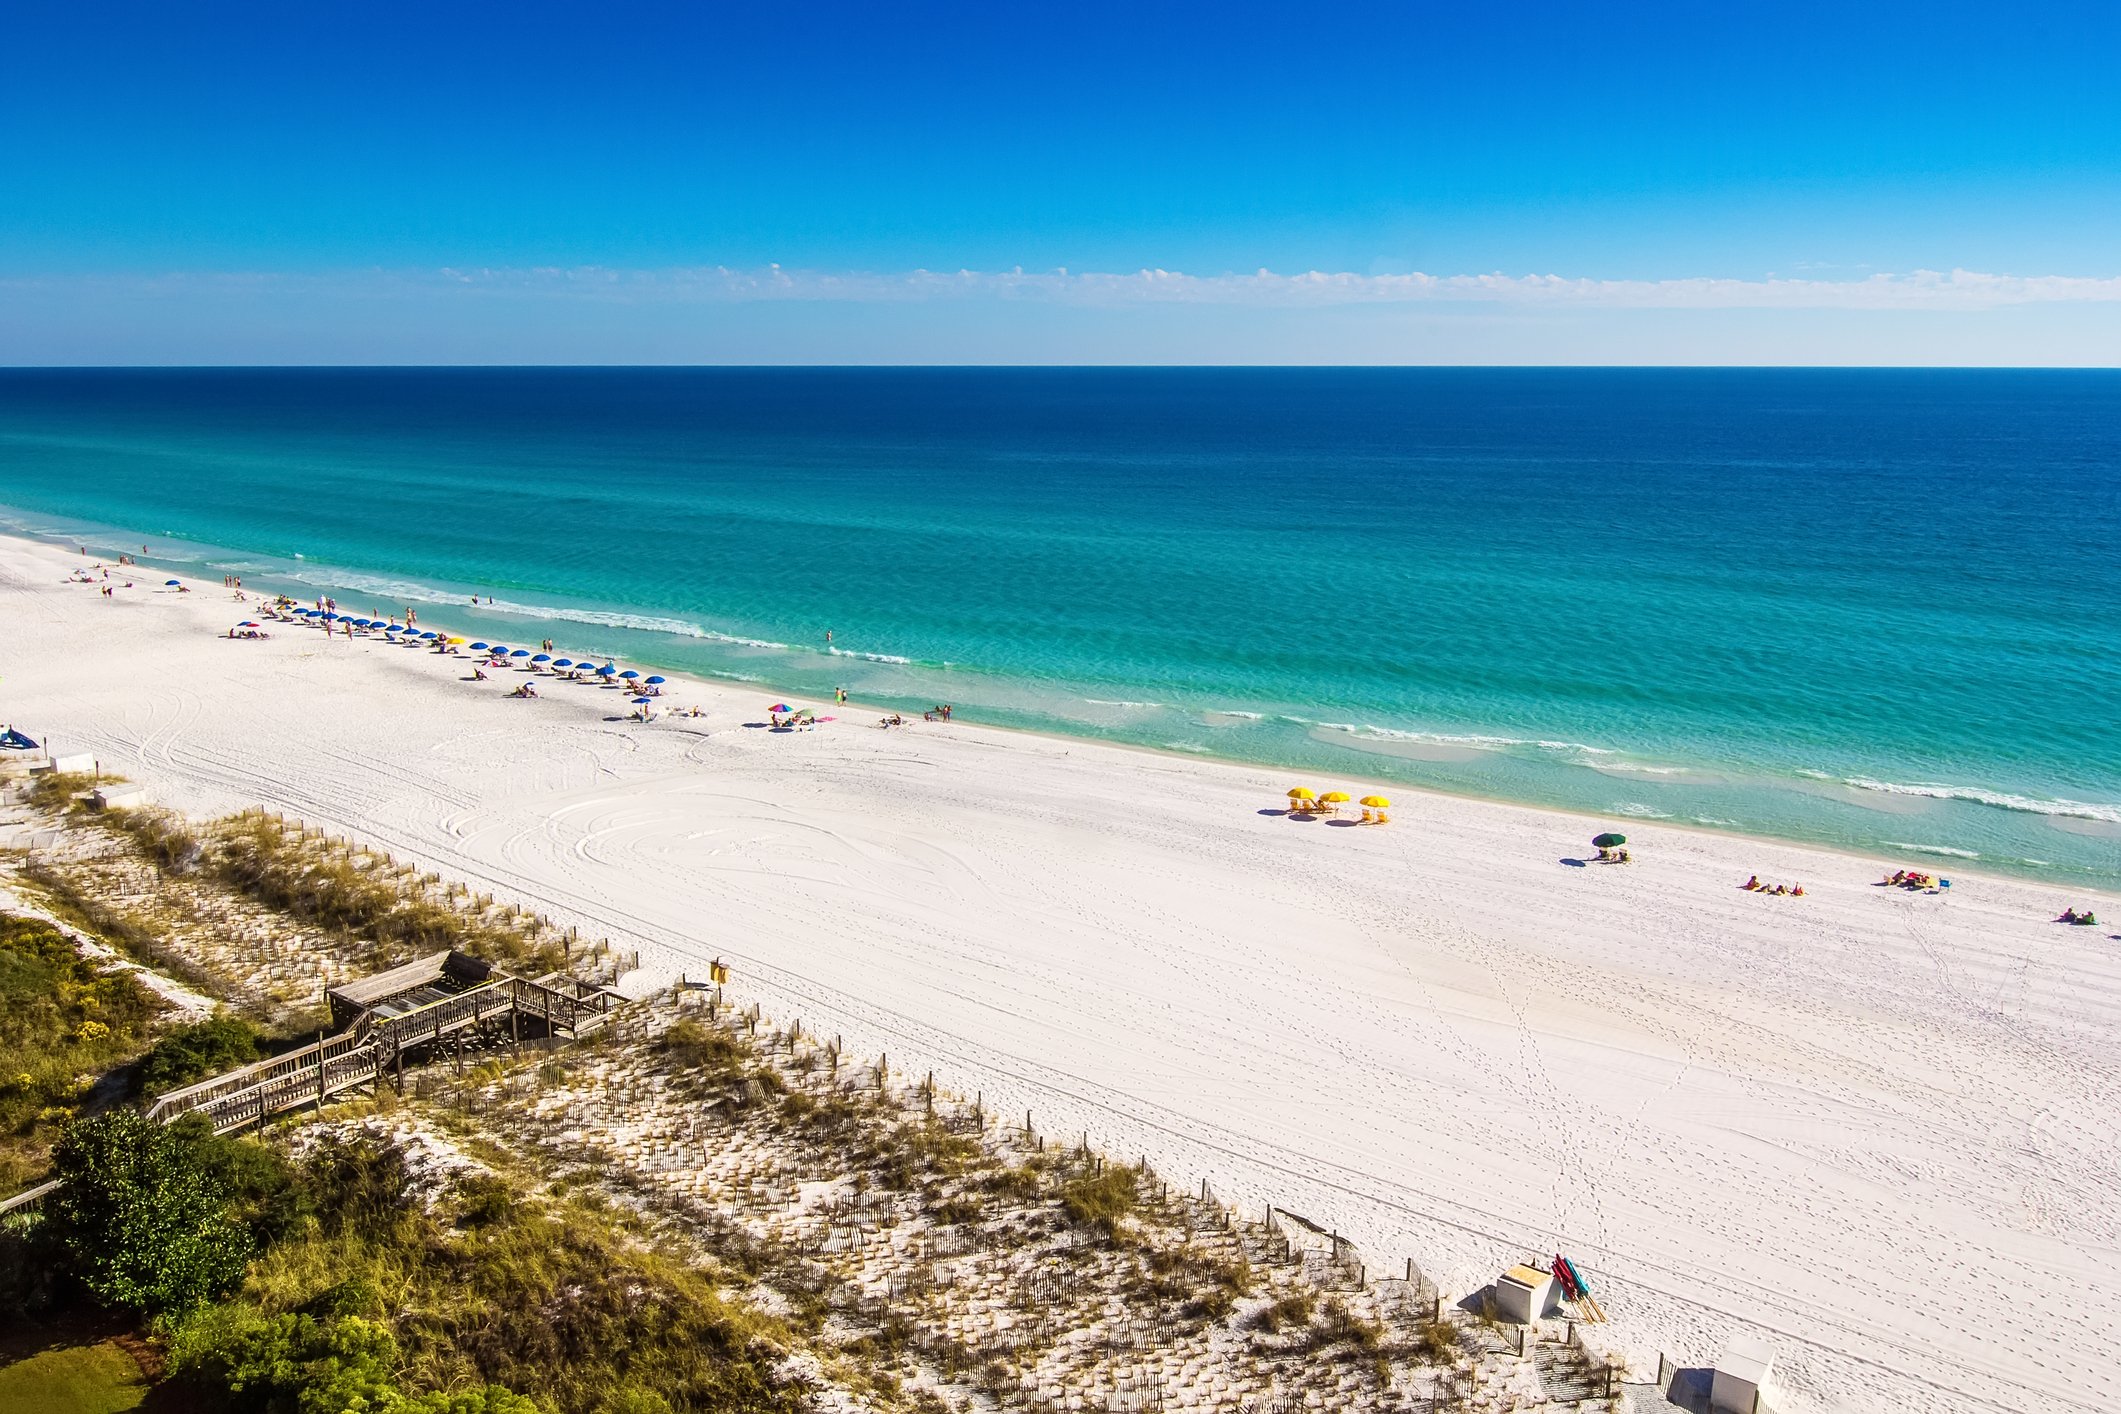 10 Of The Best Things To Do This Summer In Florida: Photos